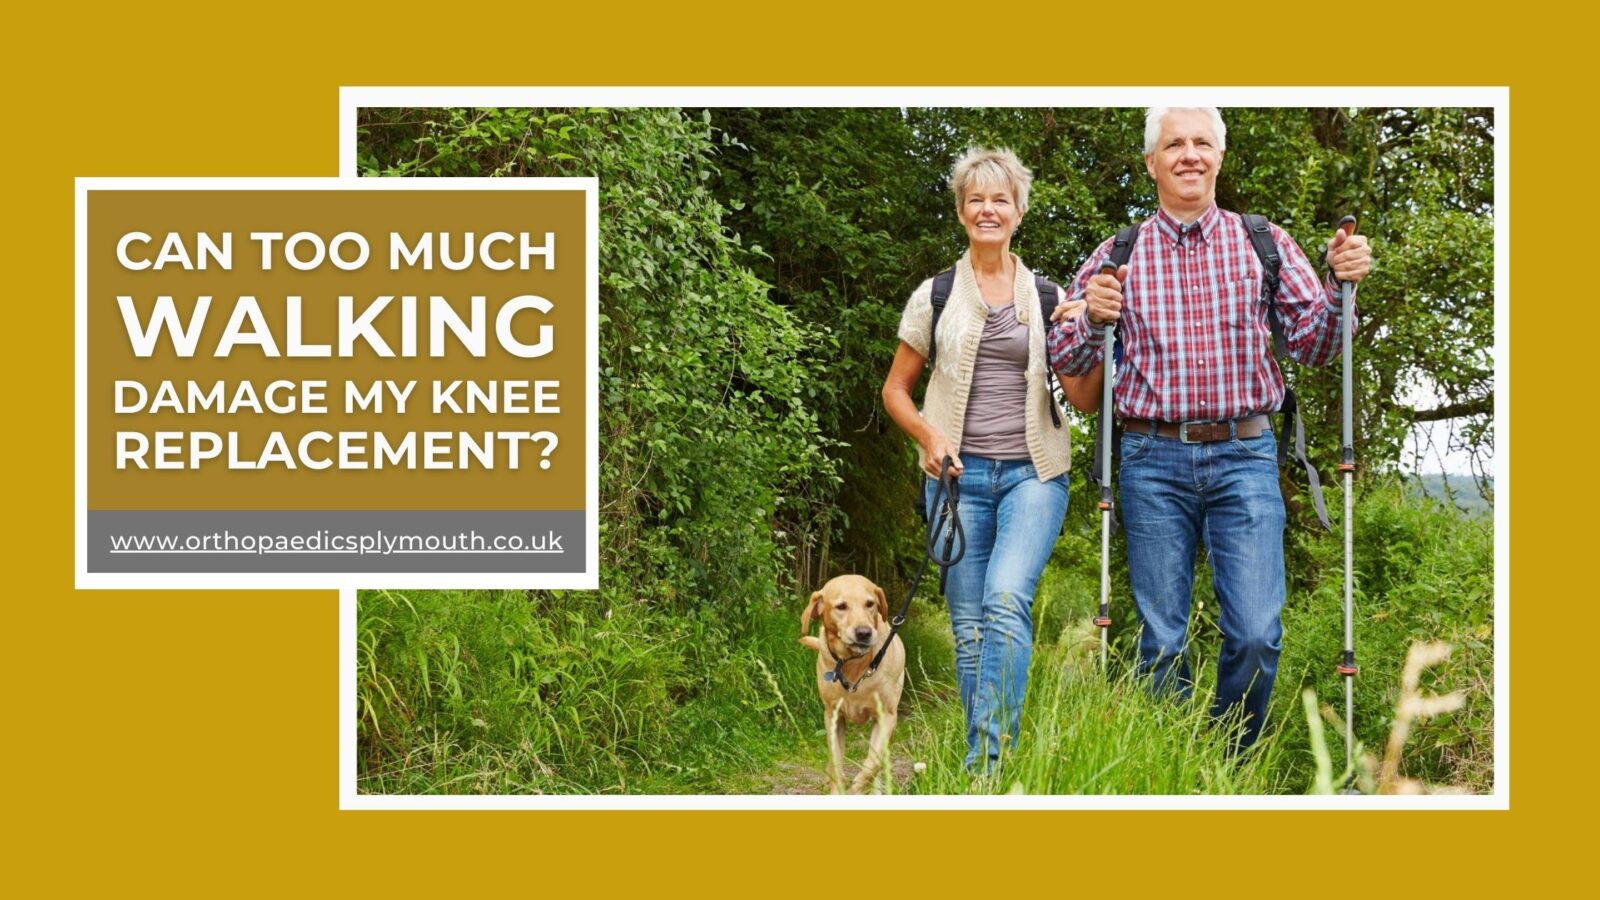 Can too much walking damage my knee replacement?